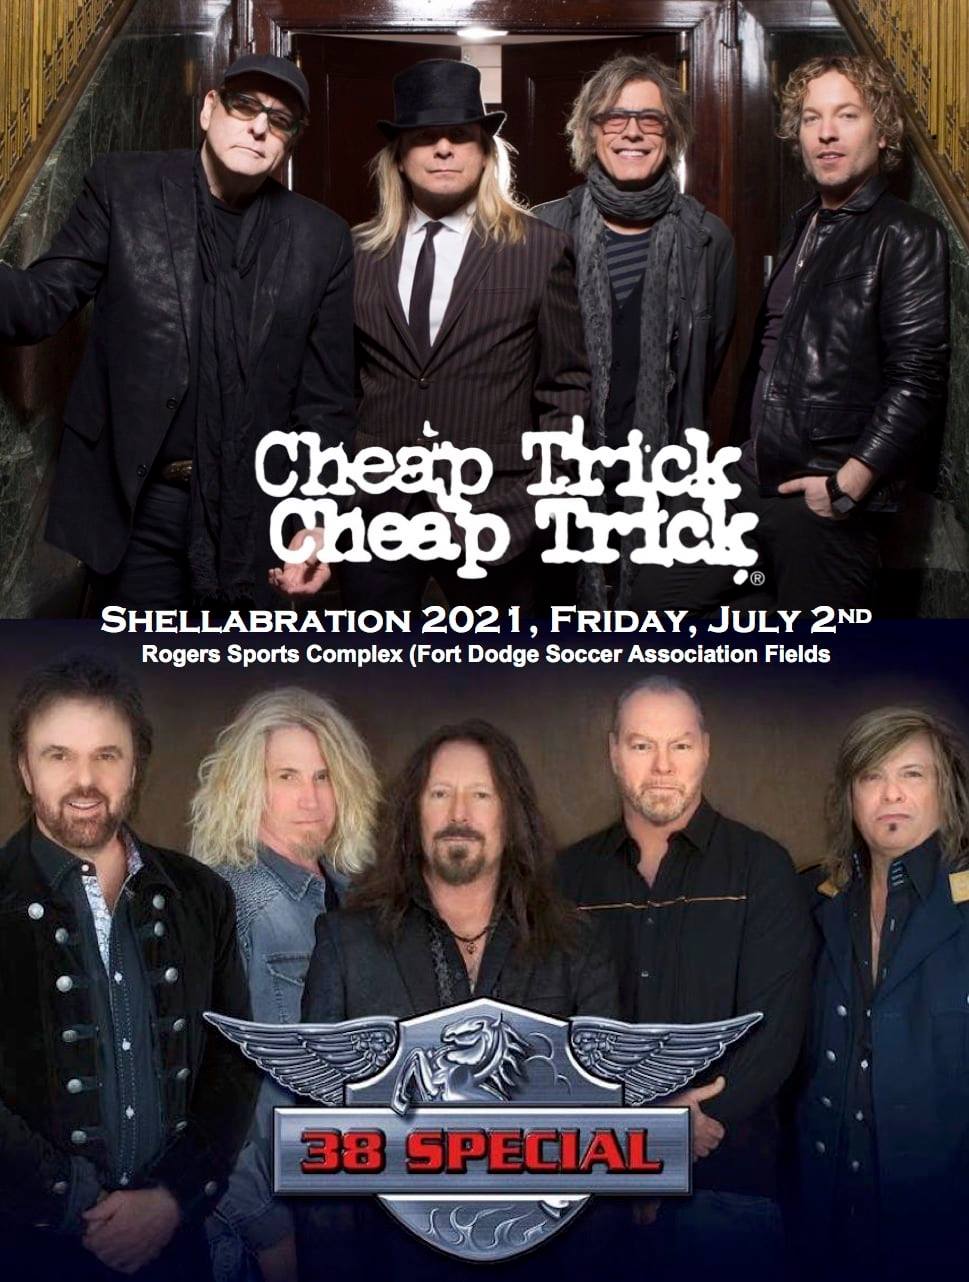 Cheap Trick Shellebration 2021, Friday July 2nd. 38 Special